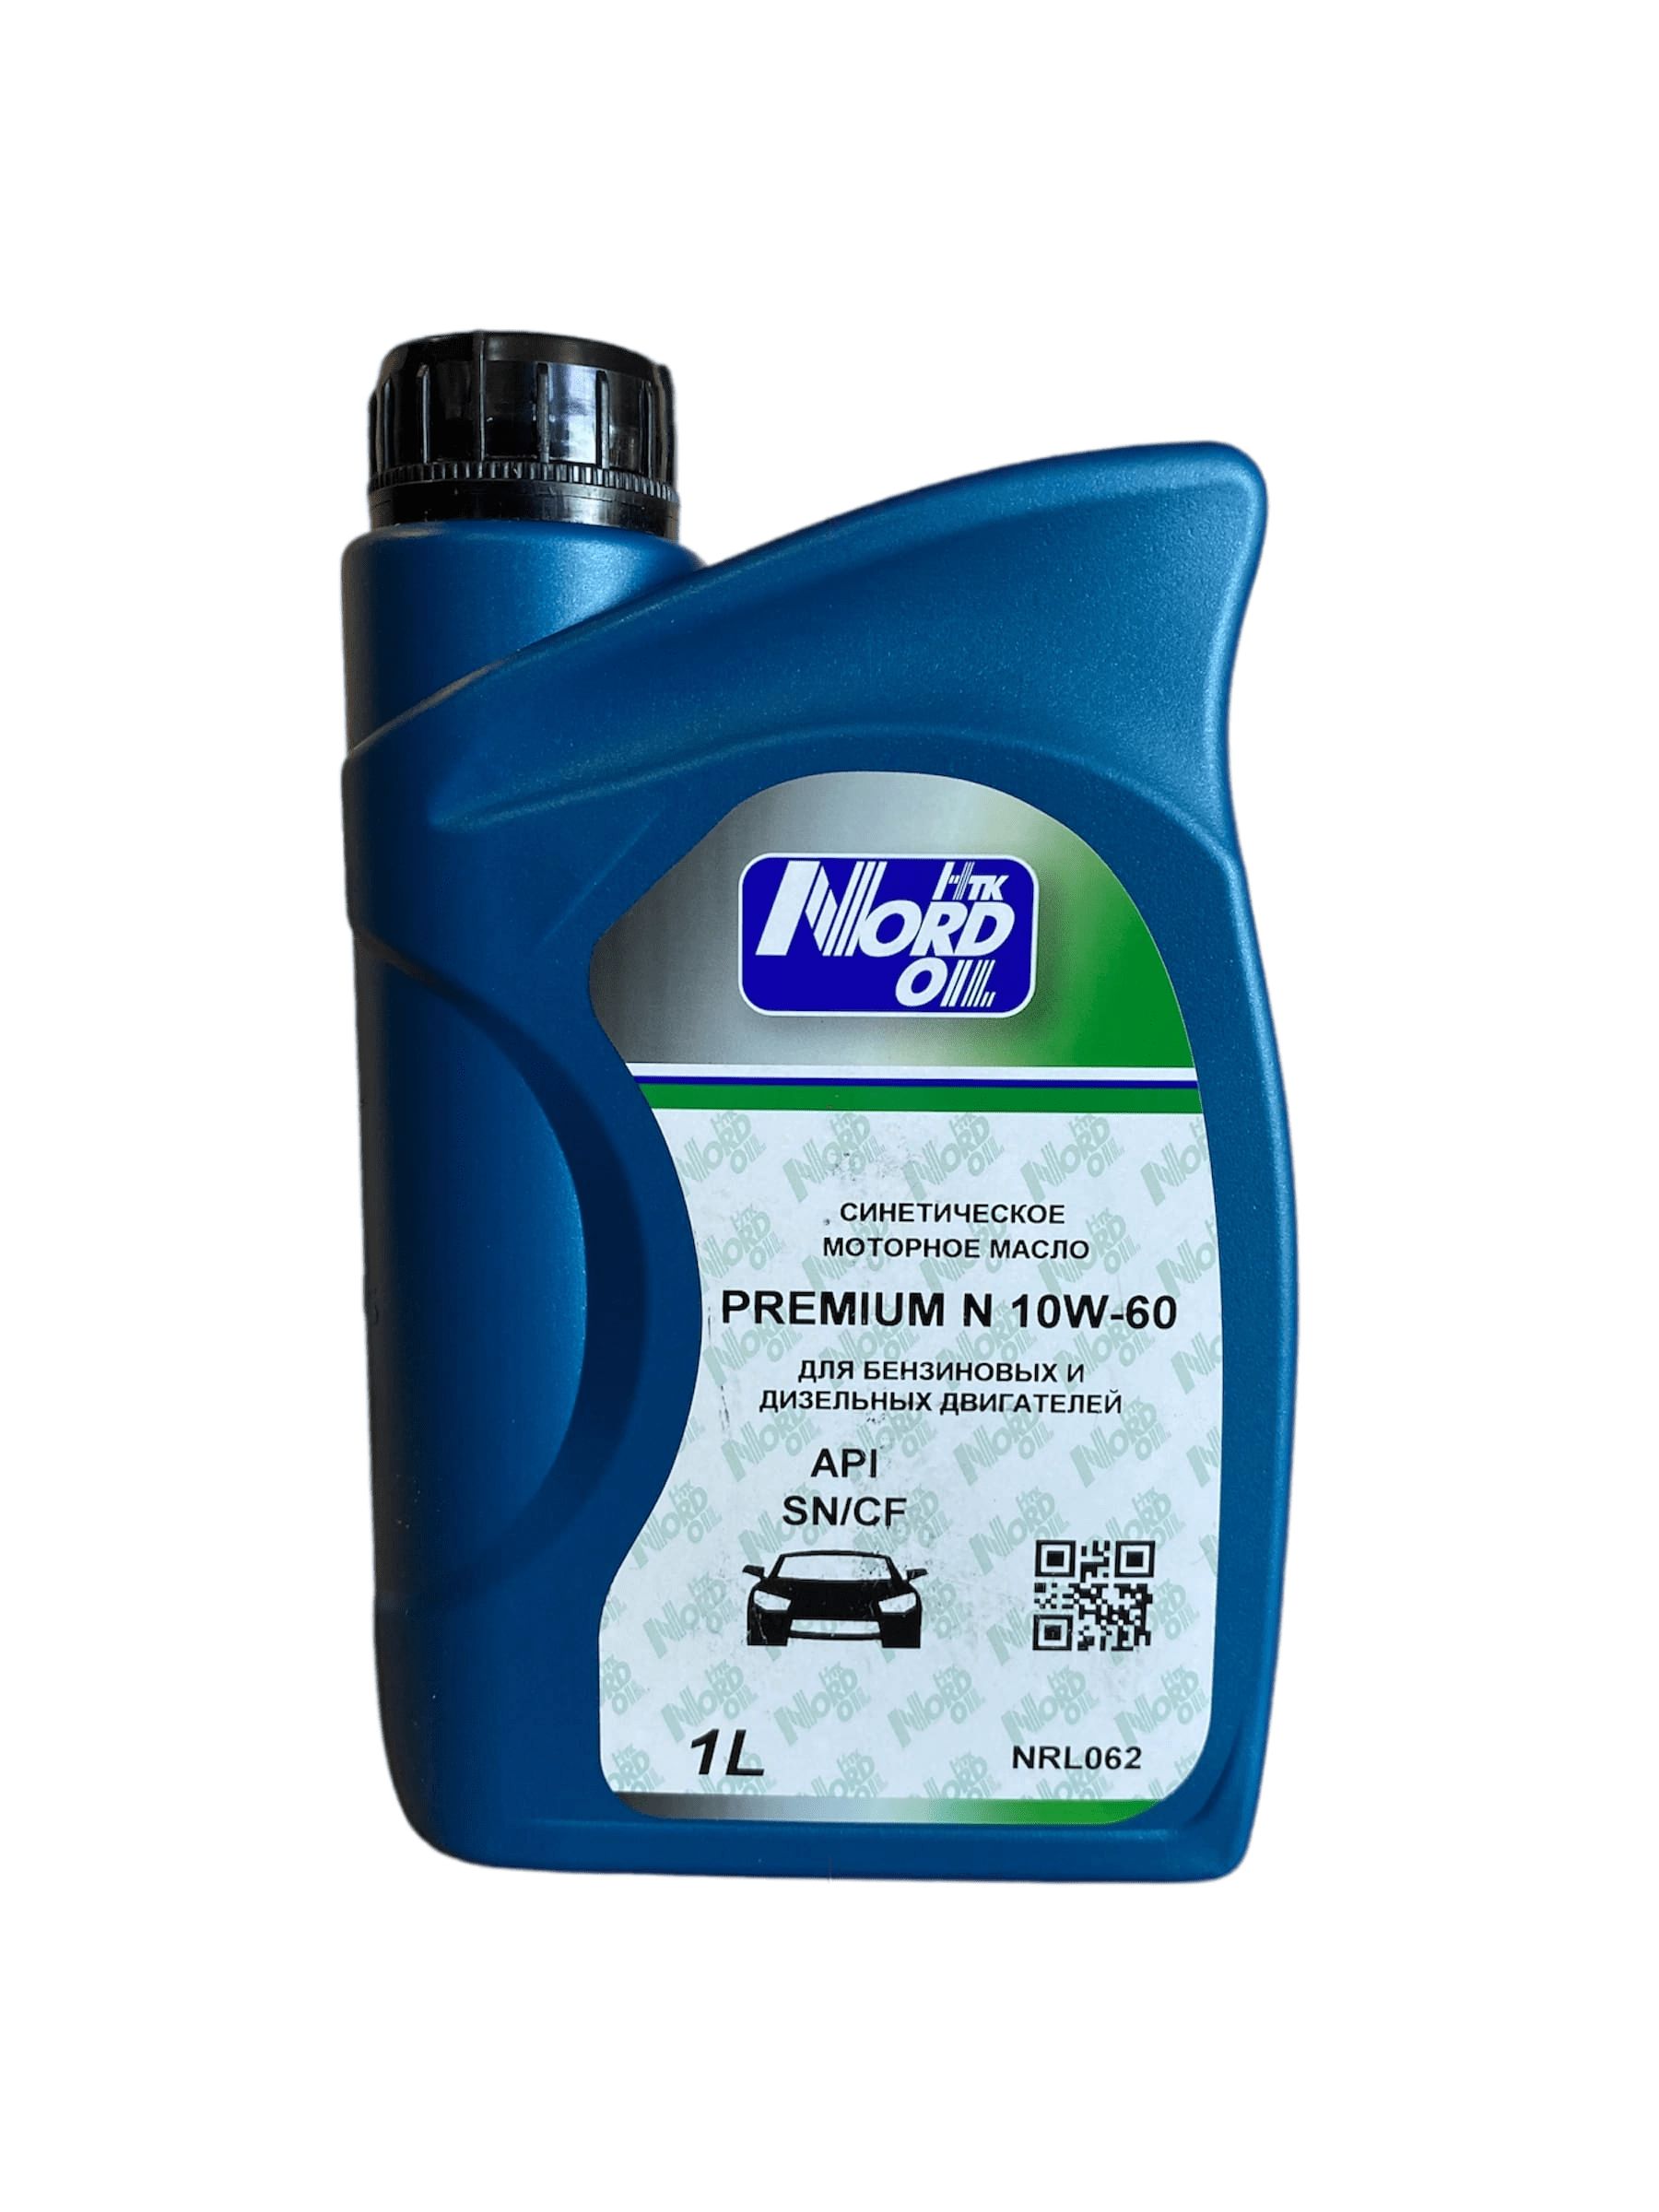 Моторное масло premium n 5w 40. Nord Oil Premium n 5w-40 SN/CF. Nord Oil Premium n 5w-40 SN/CF 5л. Nord Oil nrl002. Nord Oil 10w-40.